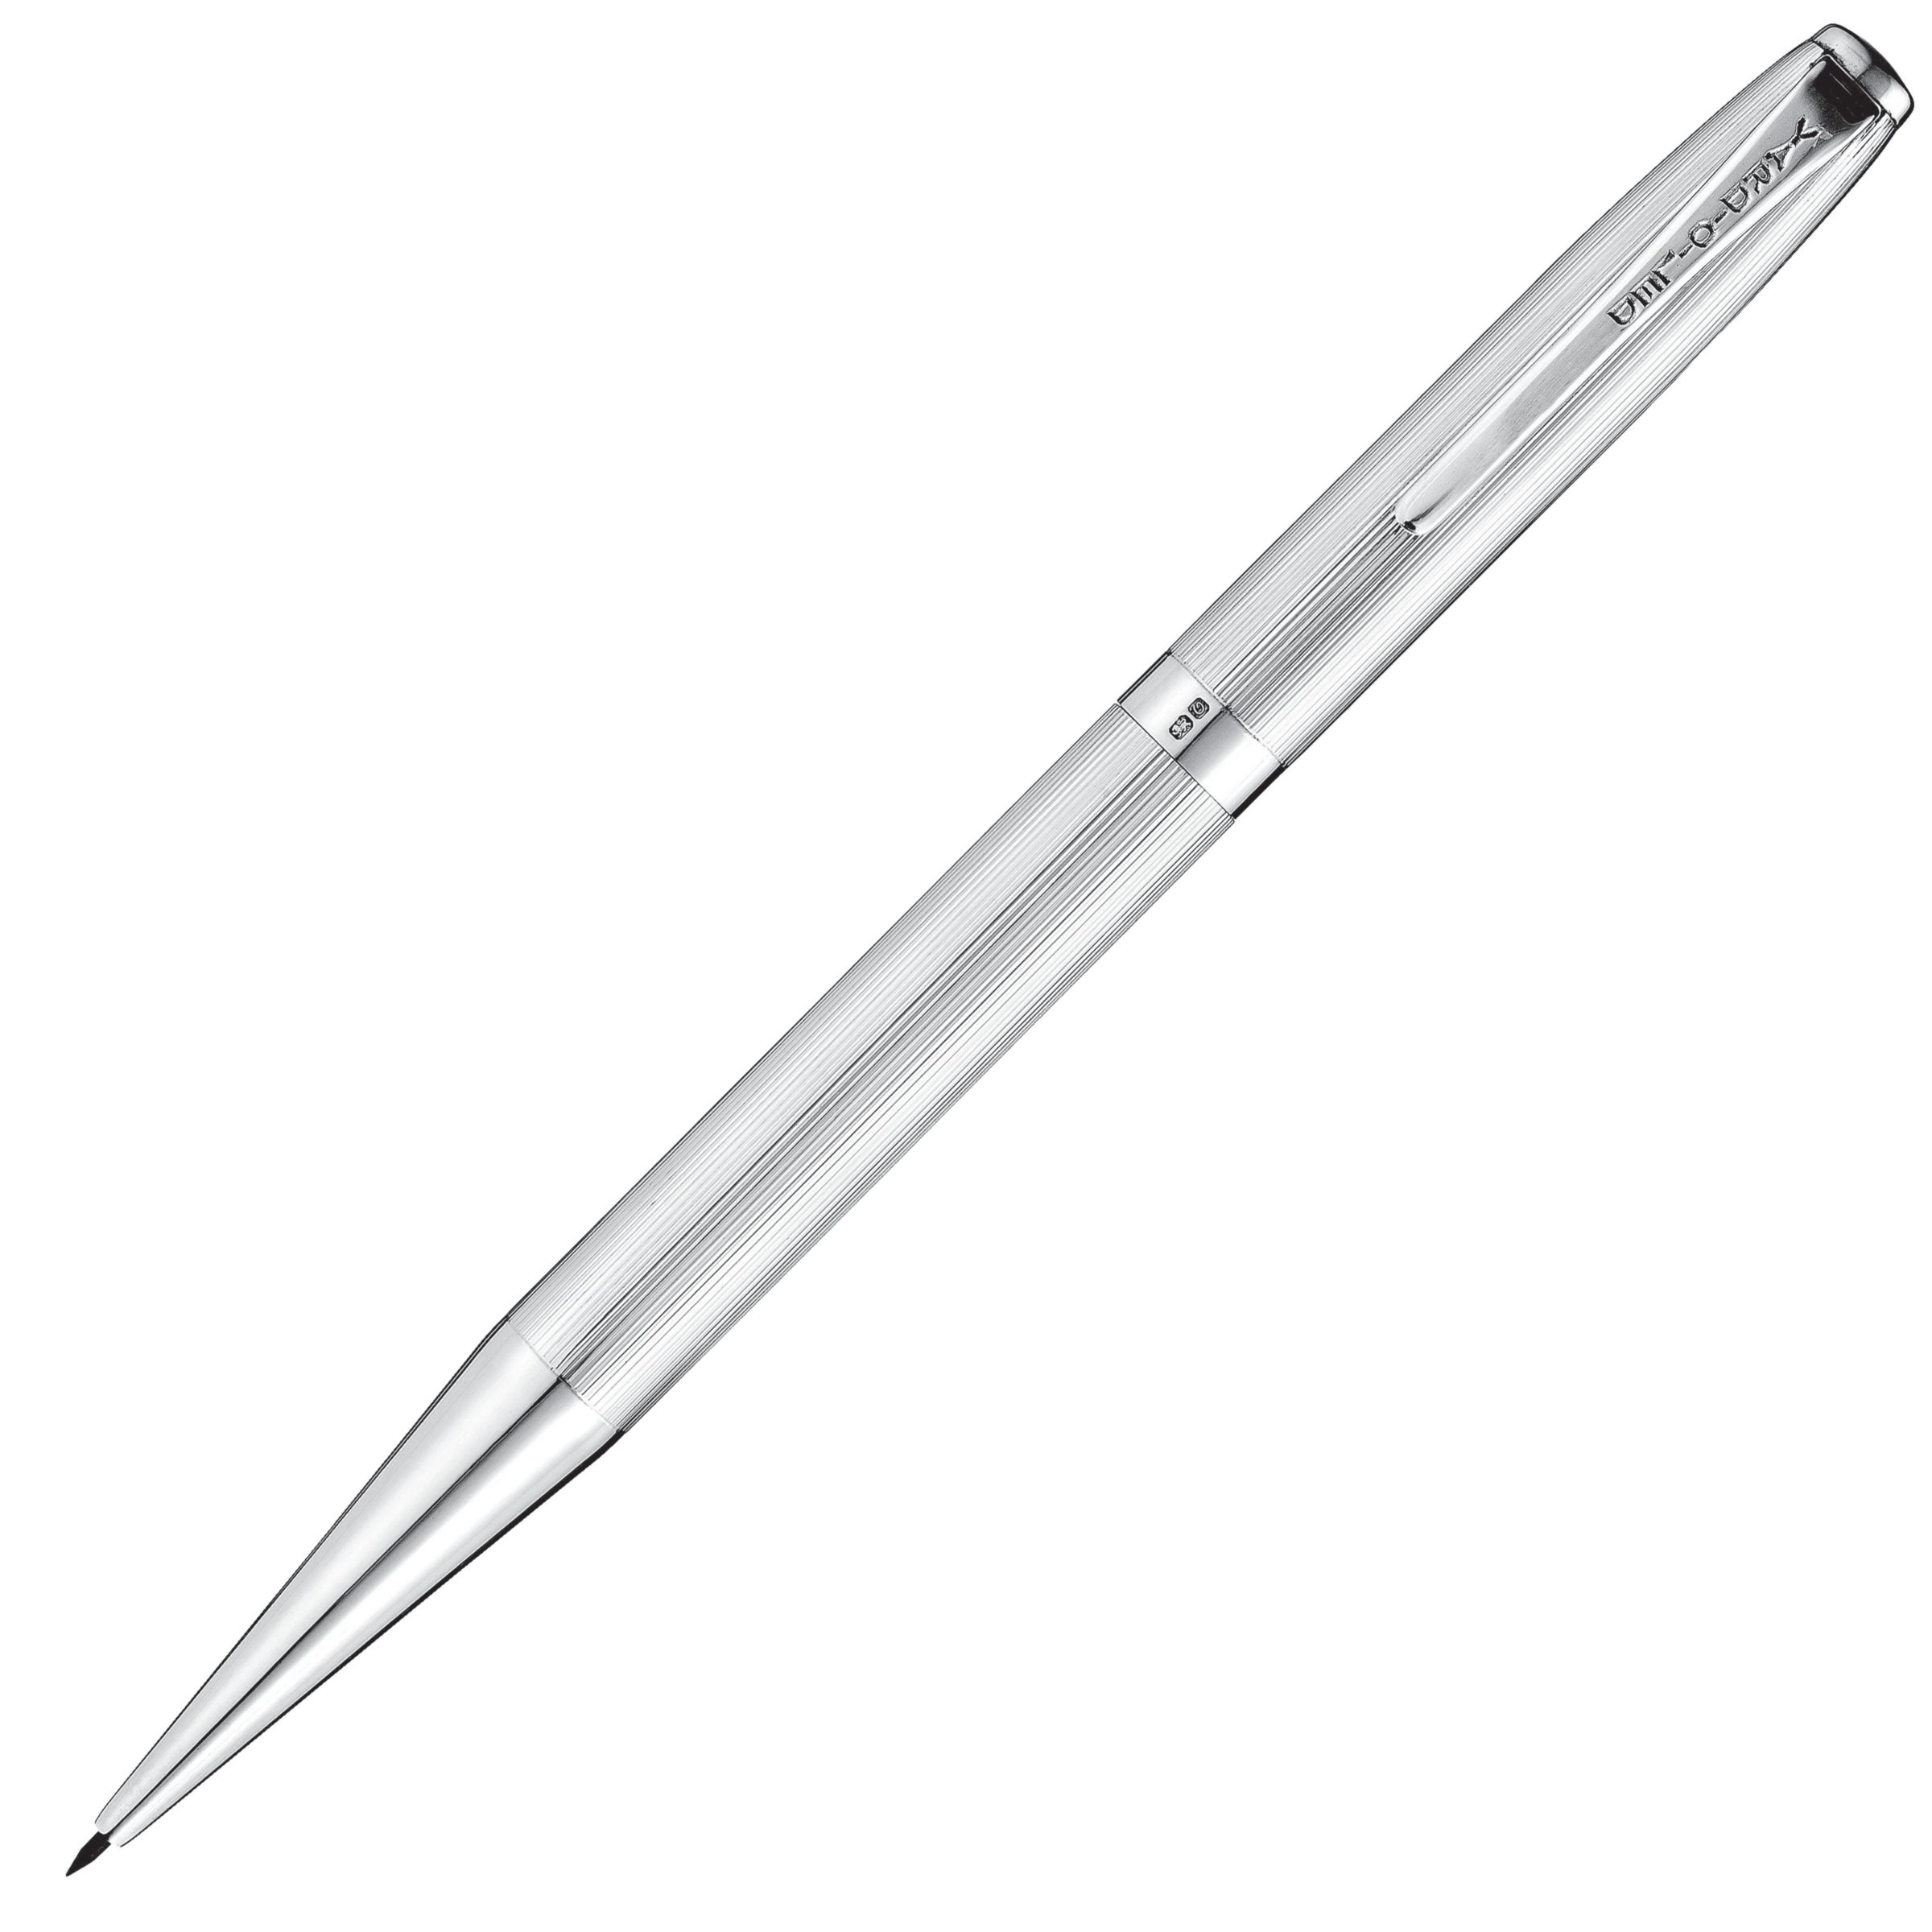 Yard-O-Led Deluxe 60 Pencil, Fine Lined Finish at John Lewis